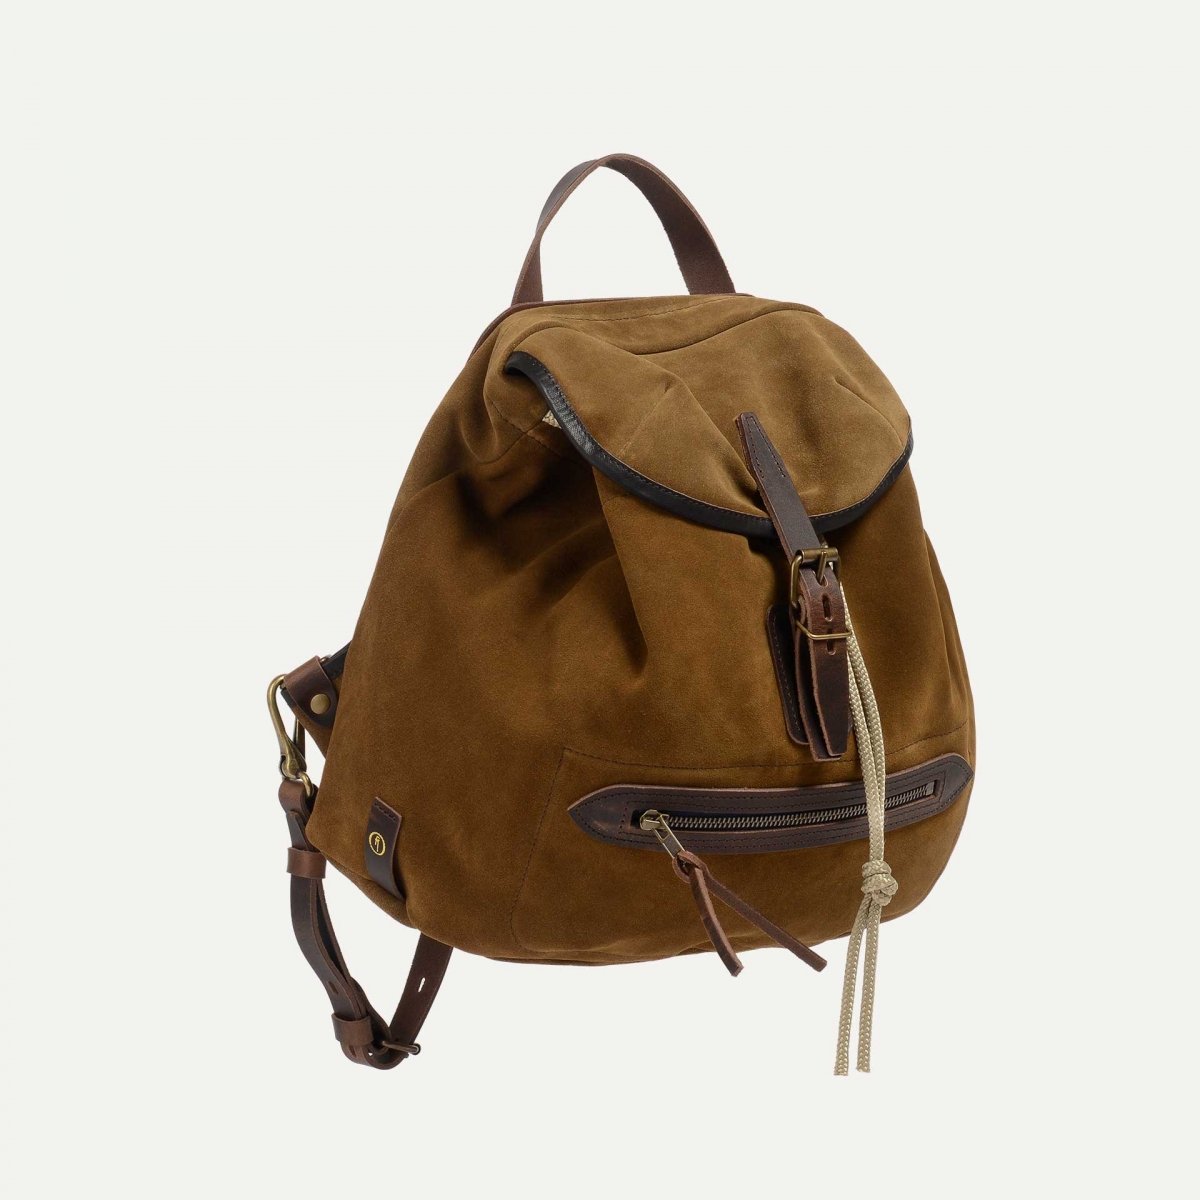 Camp S backpack / Suede - Tabacco (image n°1)